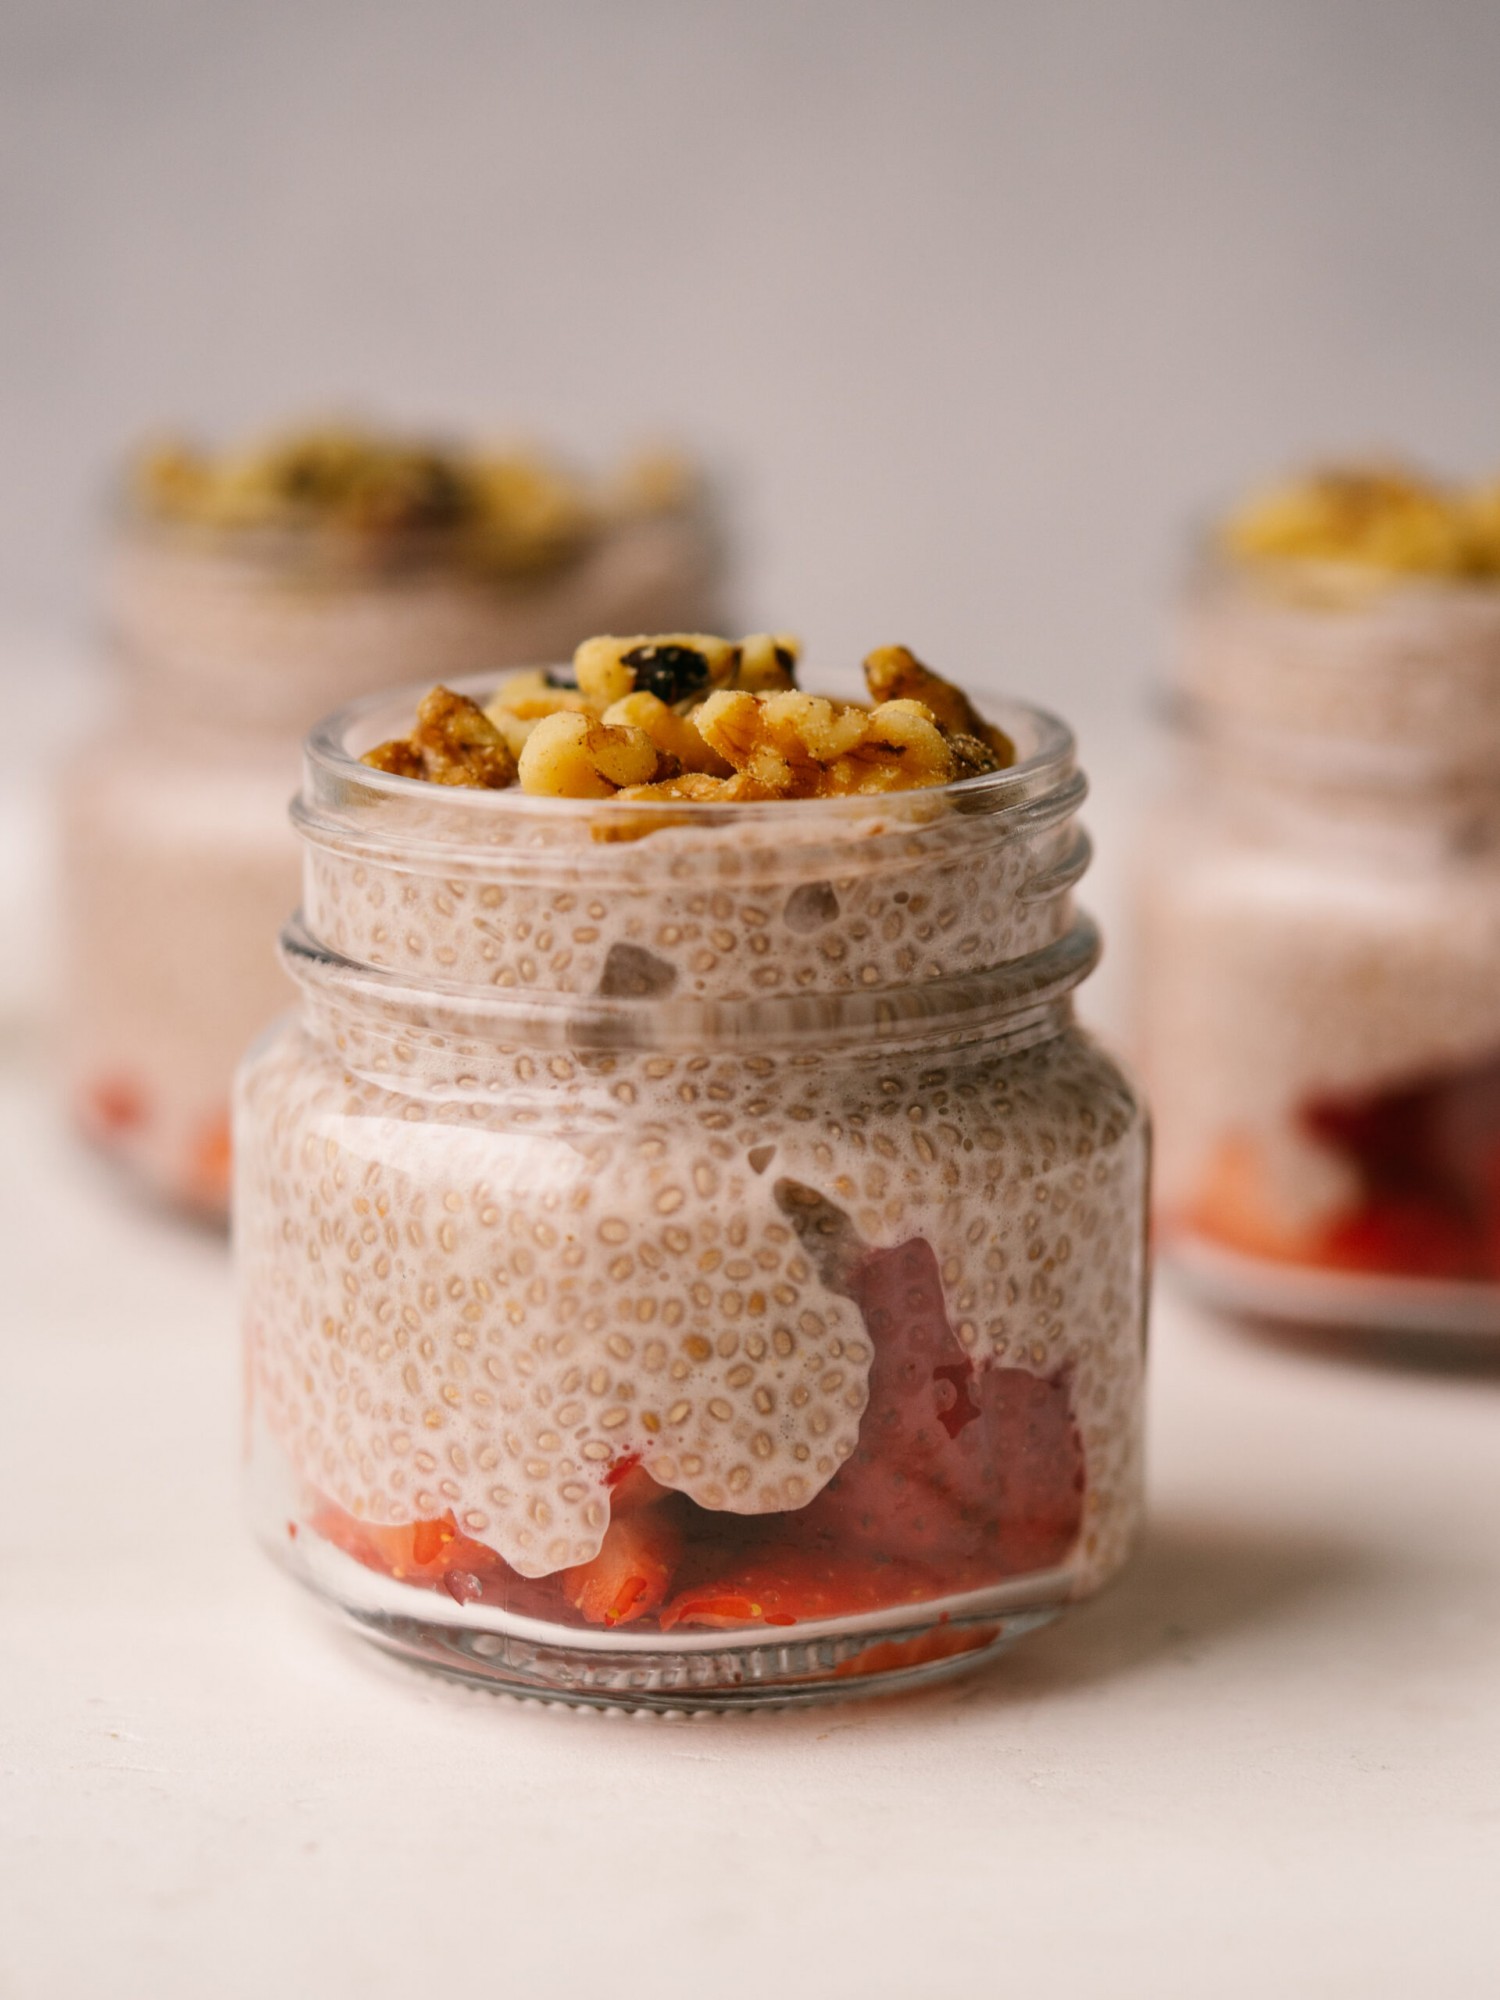 Side view of strawberry chia seed pudding in glass jars with fresh strawberries on the bottom of the jar and walnuts on top of the pudding